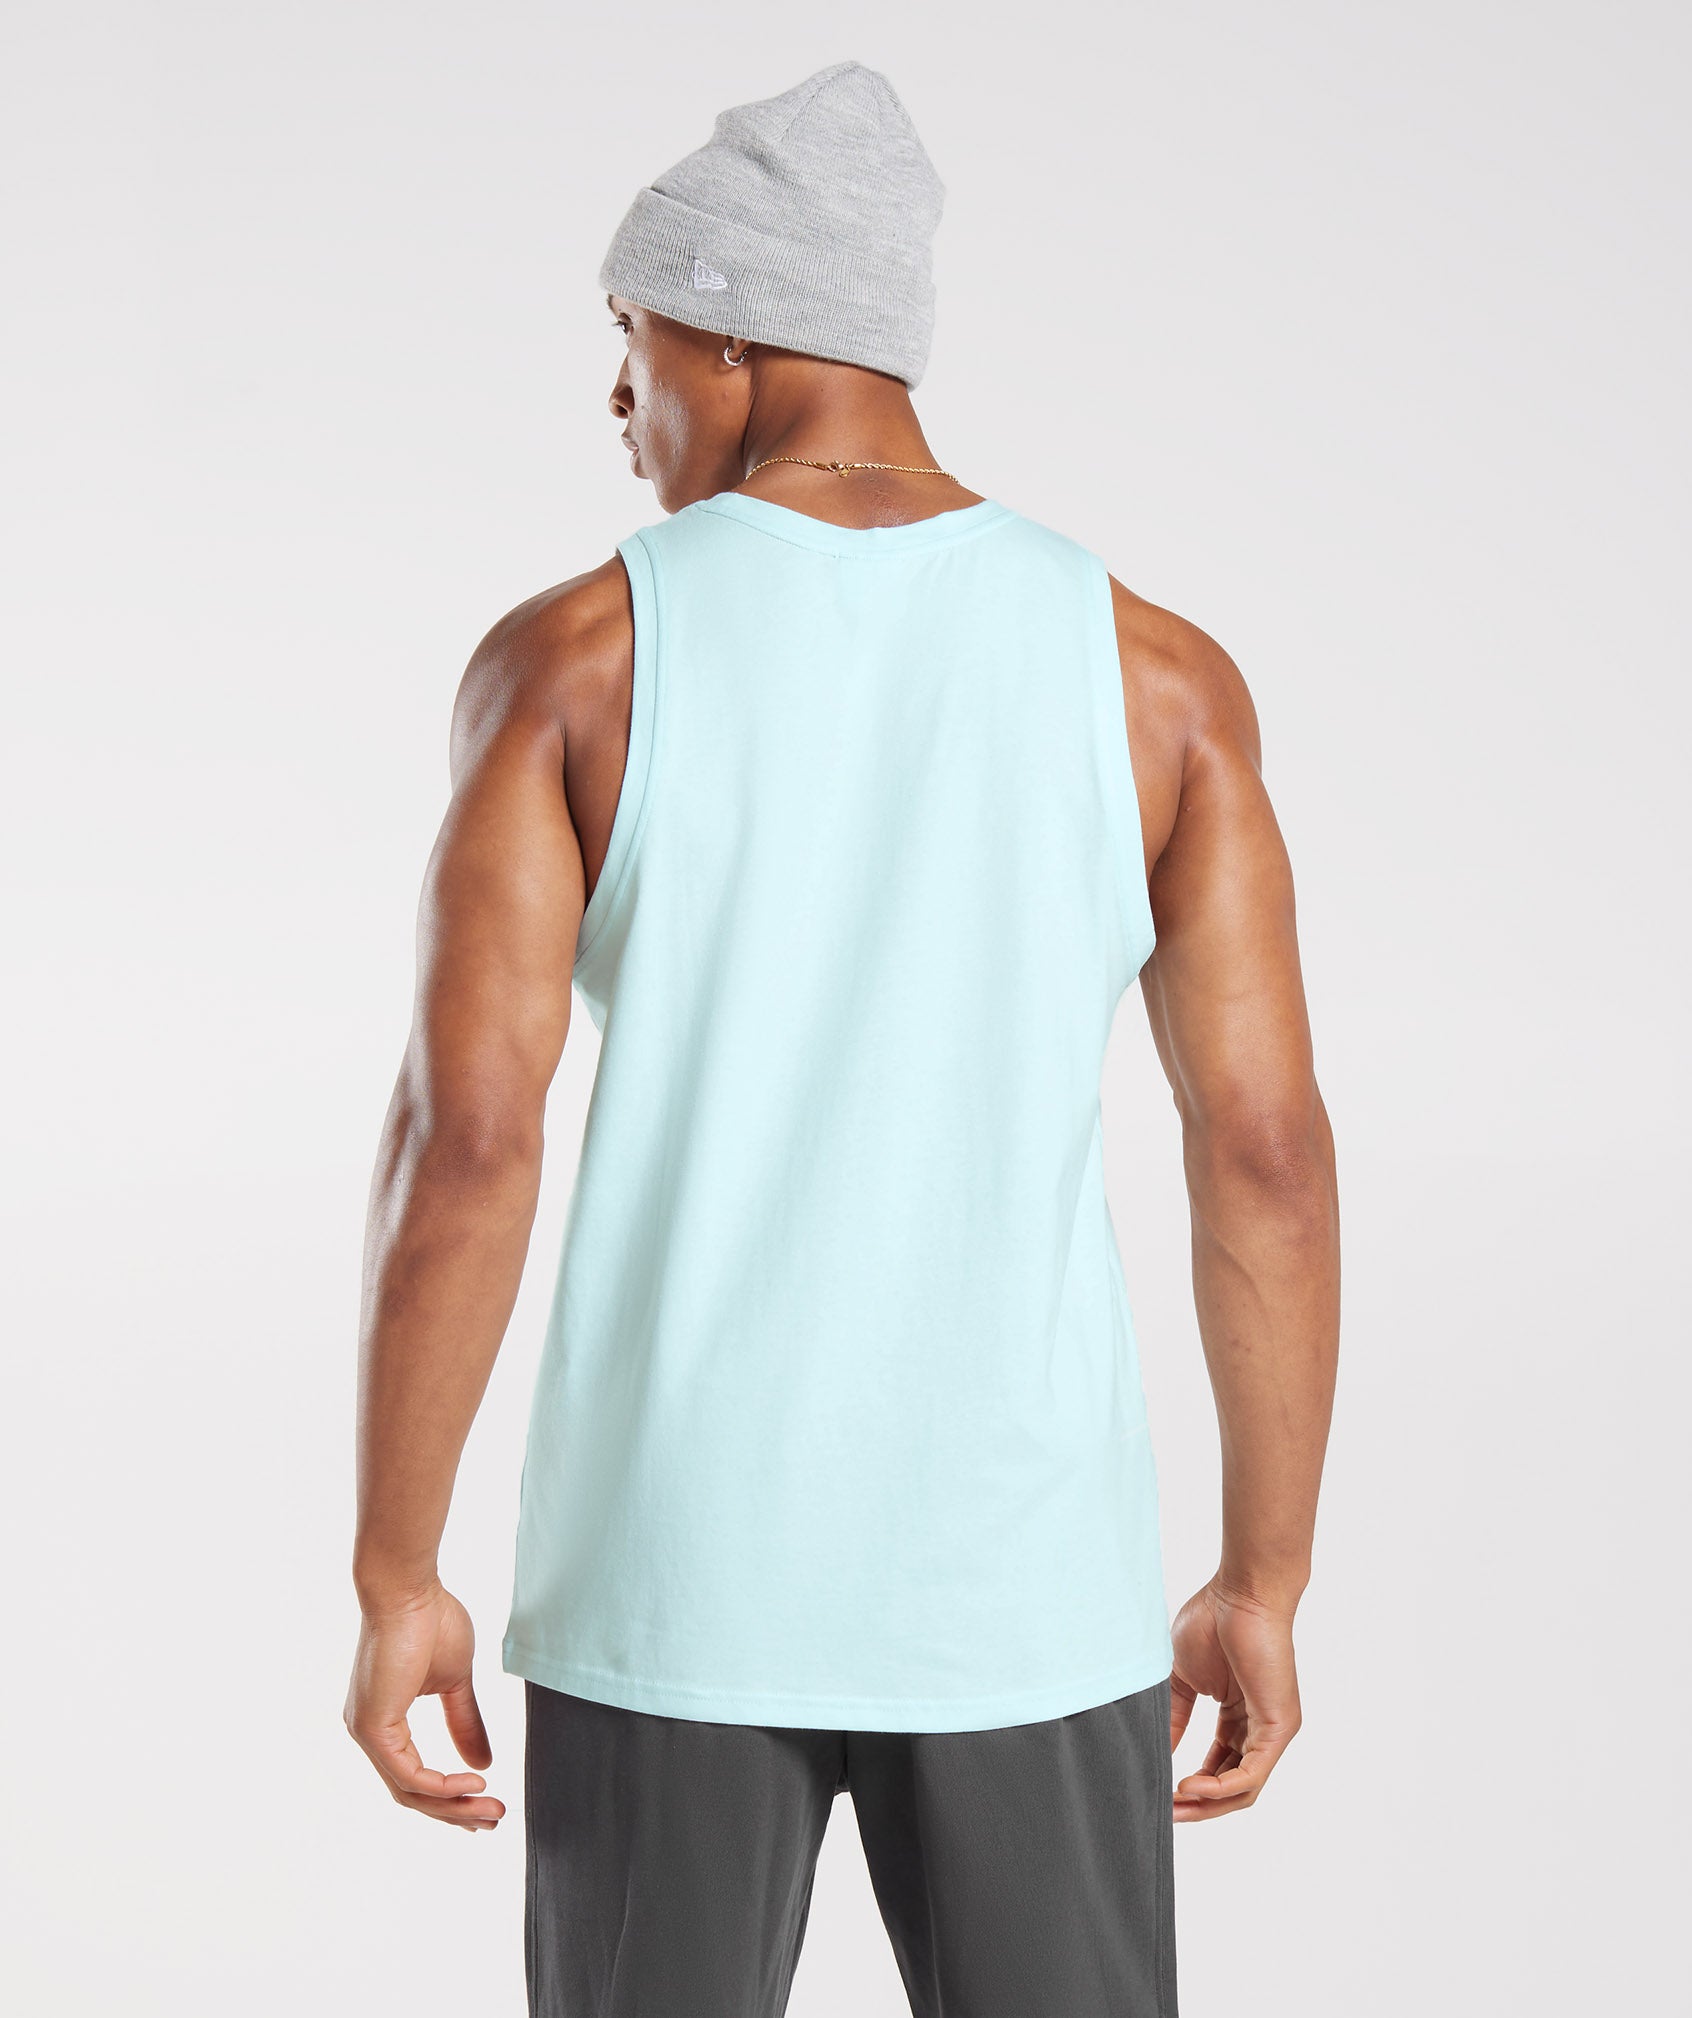 Crest Tank in Icy Blue - view 2